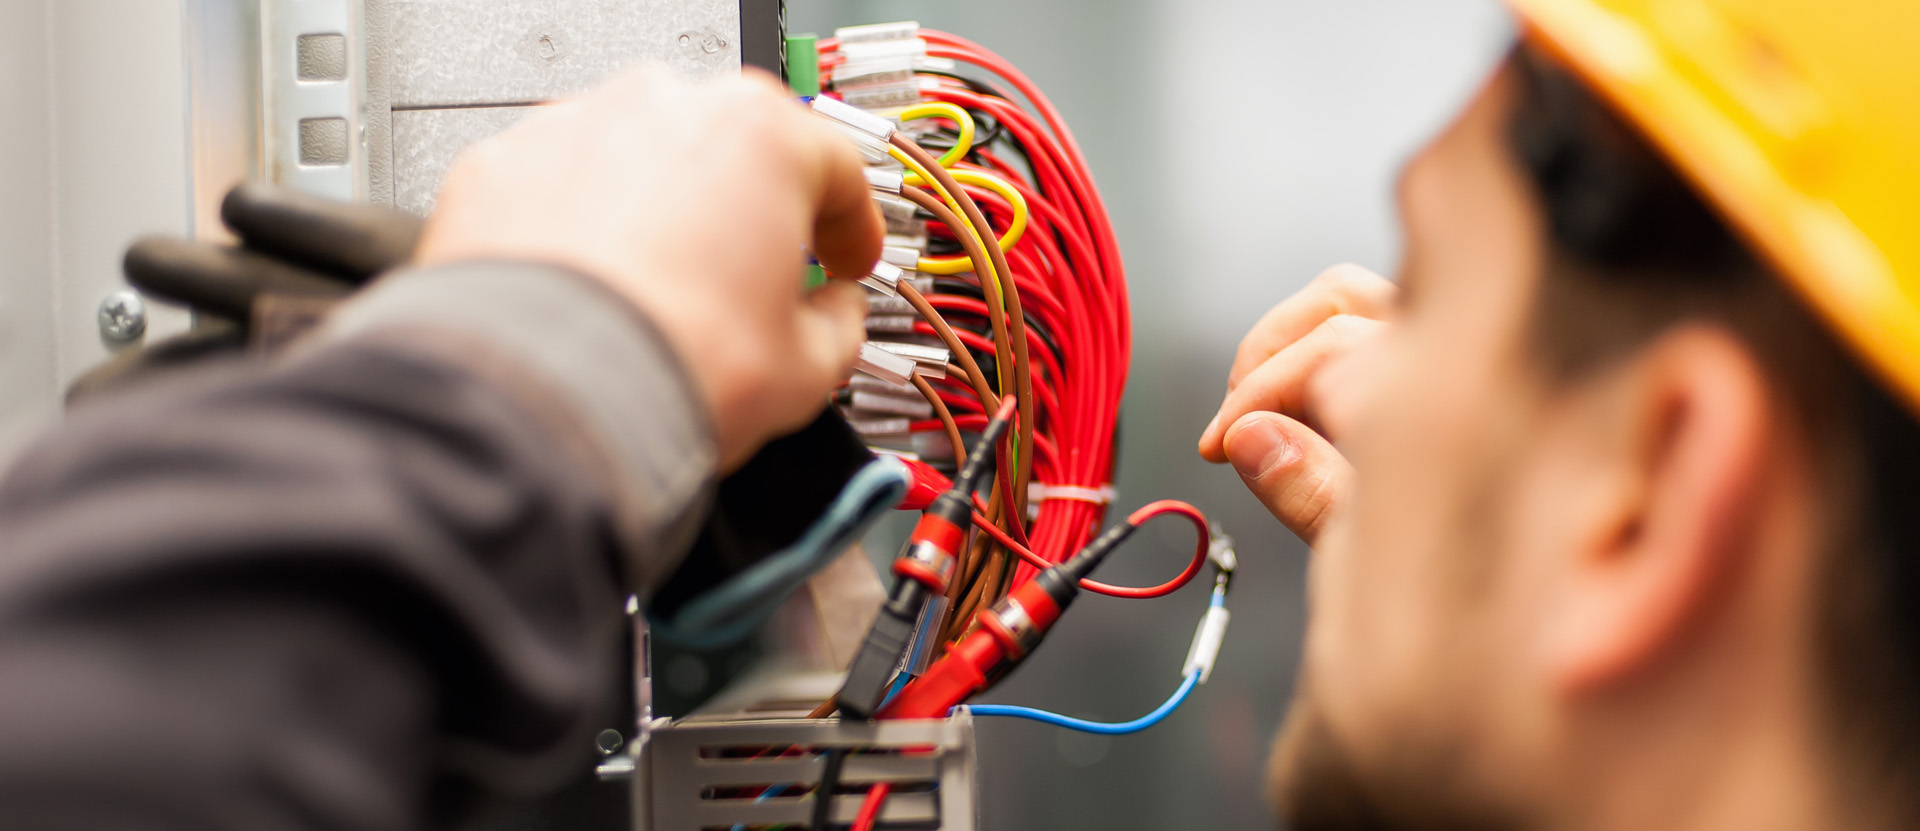 Electrician,Engineer,Tests,Electrical,Installations,And,Wires,On,Relay,Protection